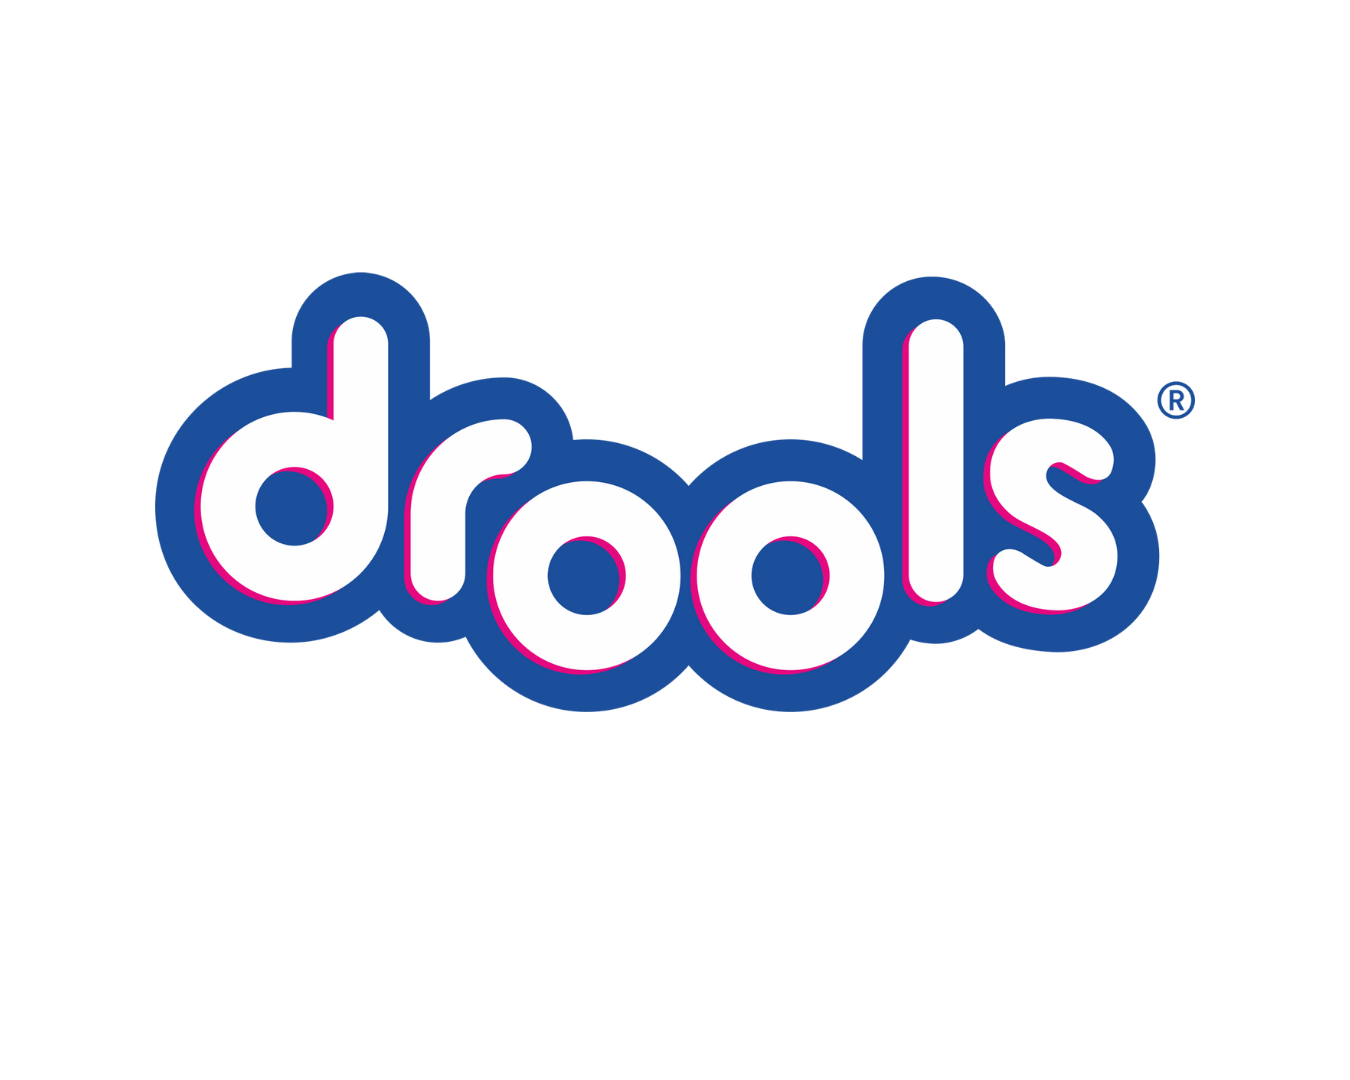 Drools pet food logo featuring the brand name in a playful curvy font with blue and pink colors.